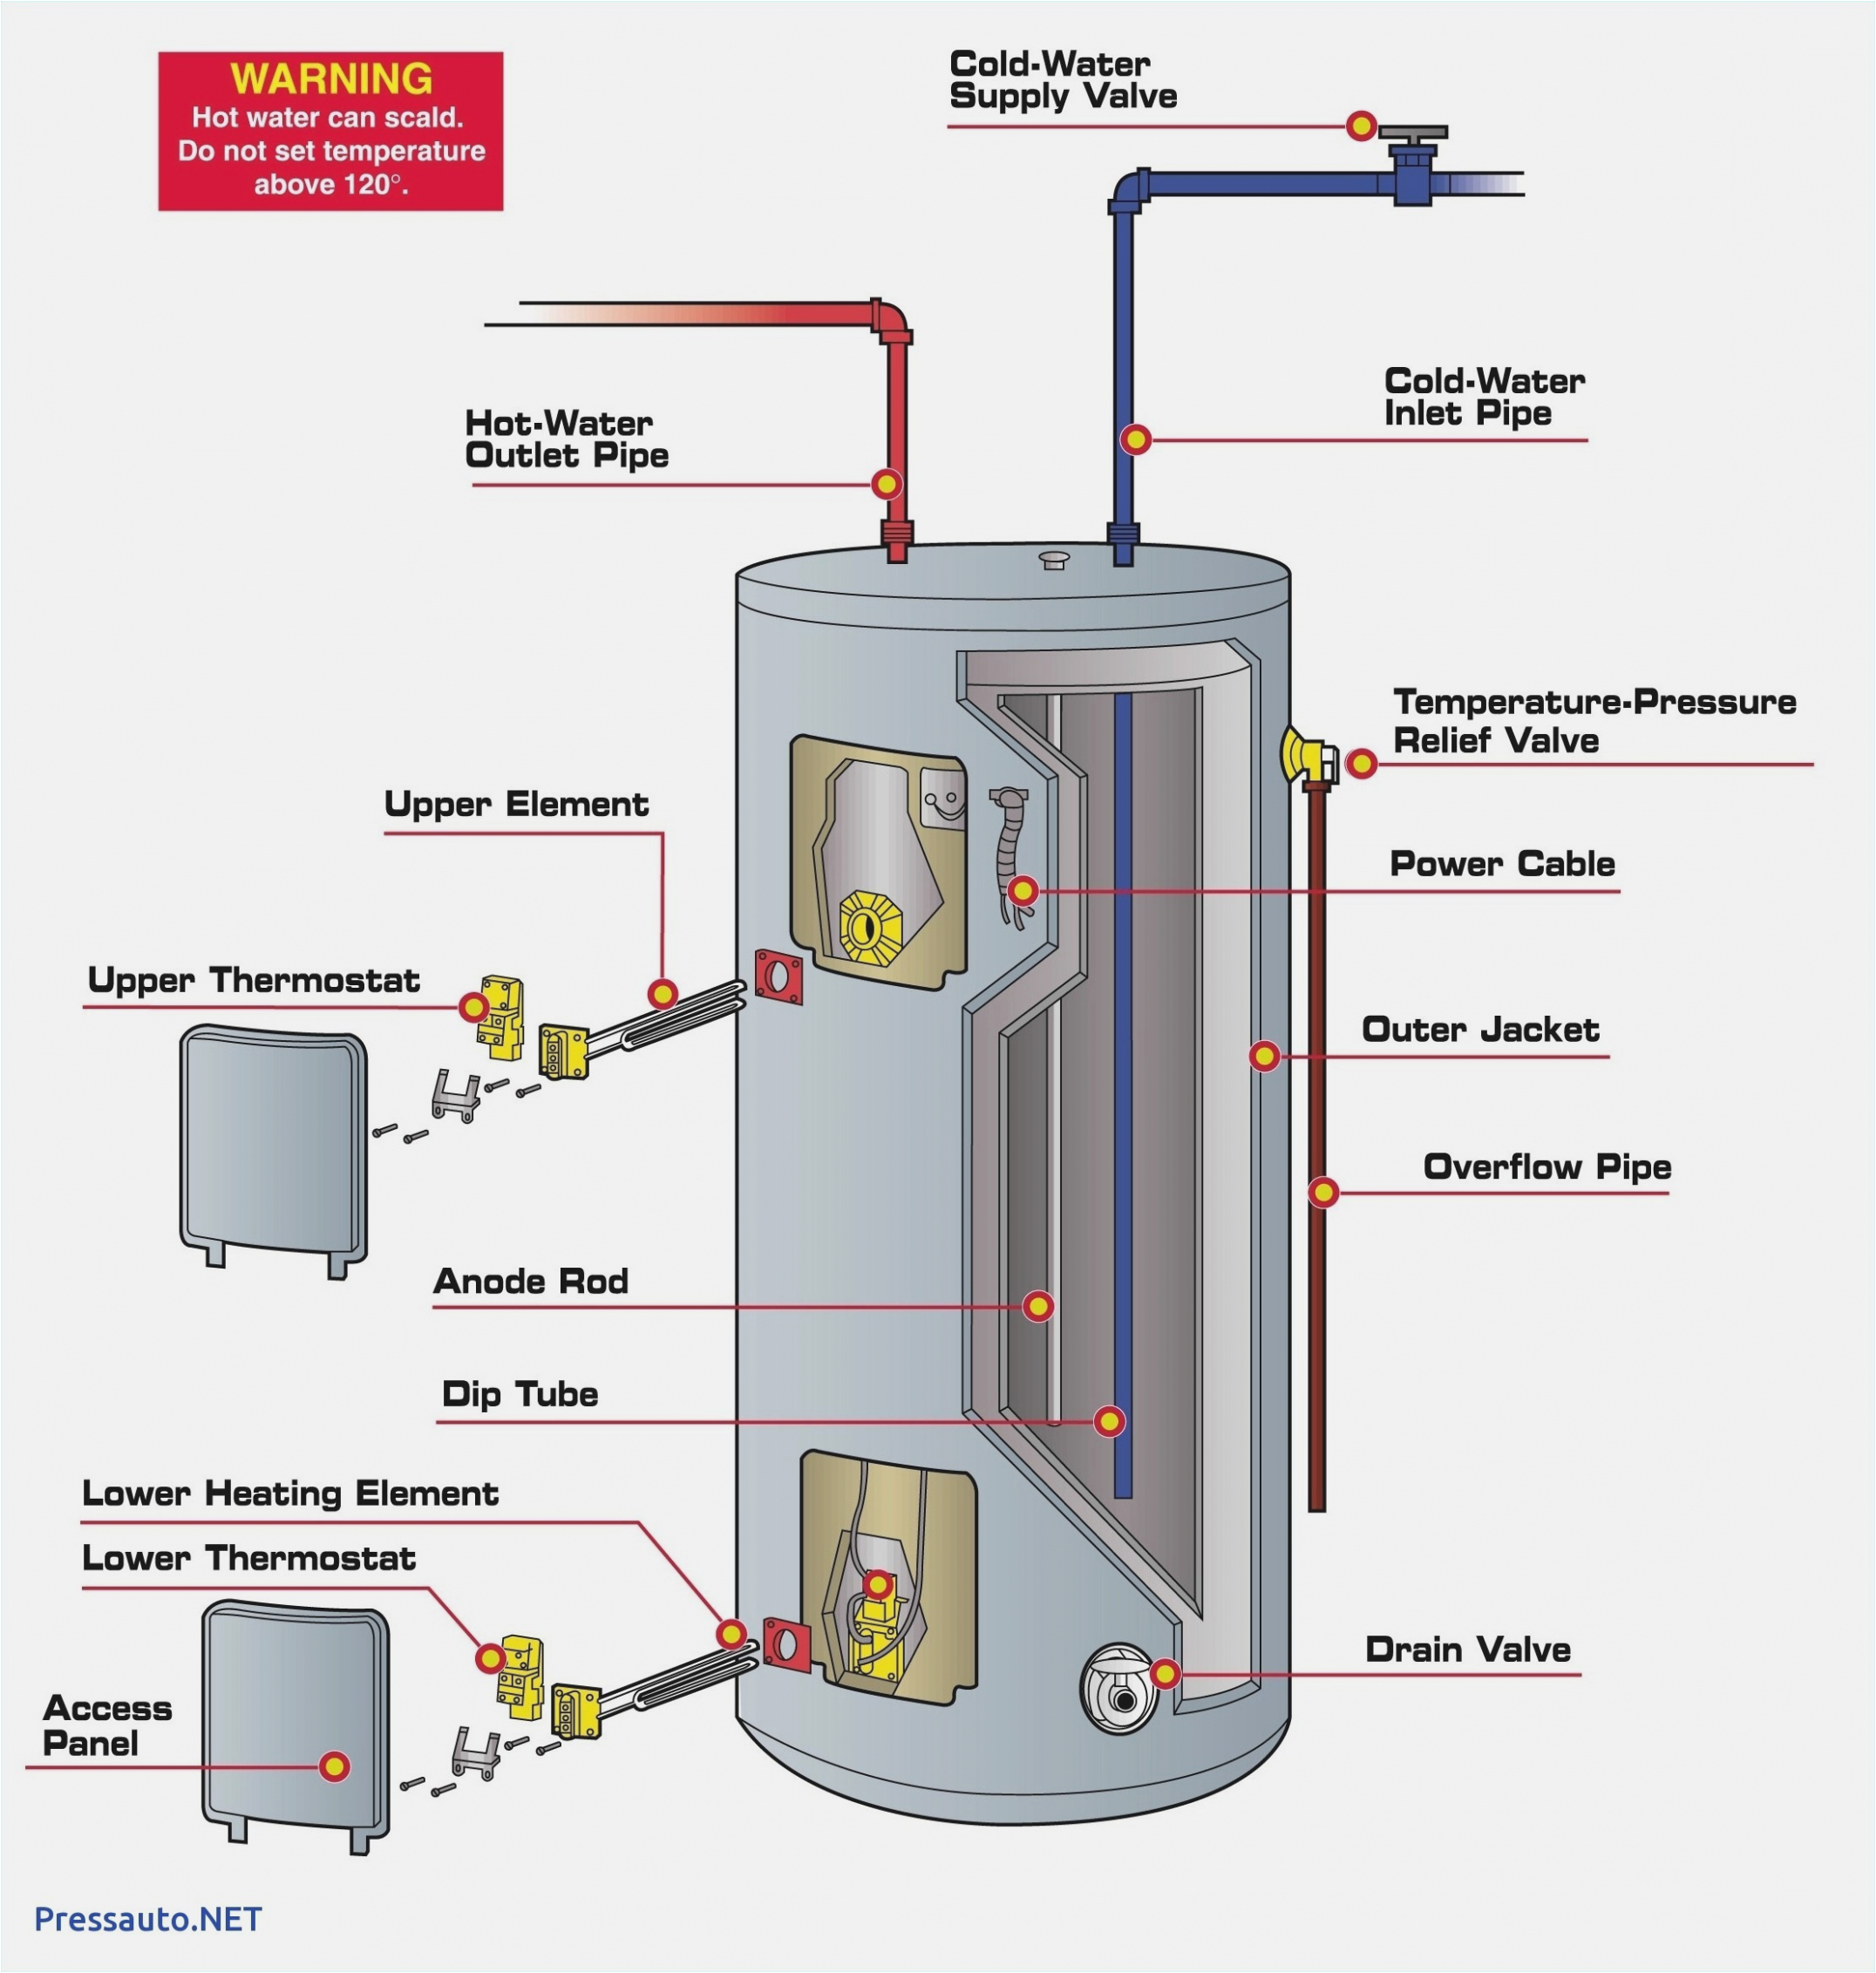 Wiring Diagram for Immersion Heater Ruud Electrical Diagram Wiring Diagram Paper